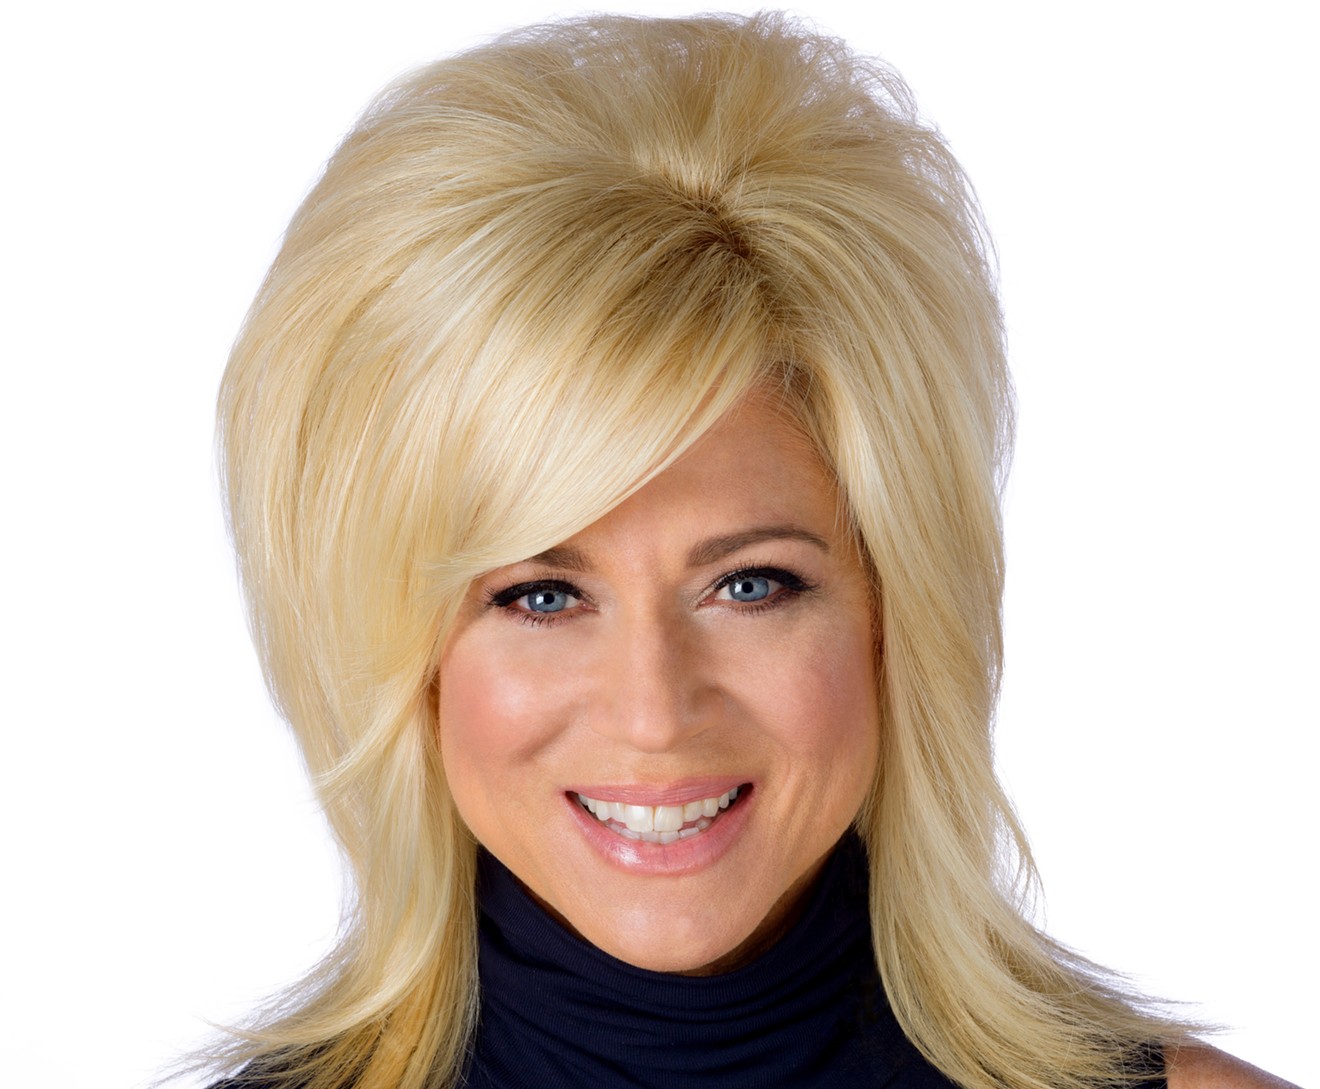 Psychic Theresa Caputo will take to the Bellco Theatre stage on Friday, April 7.